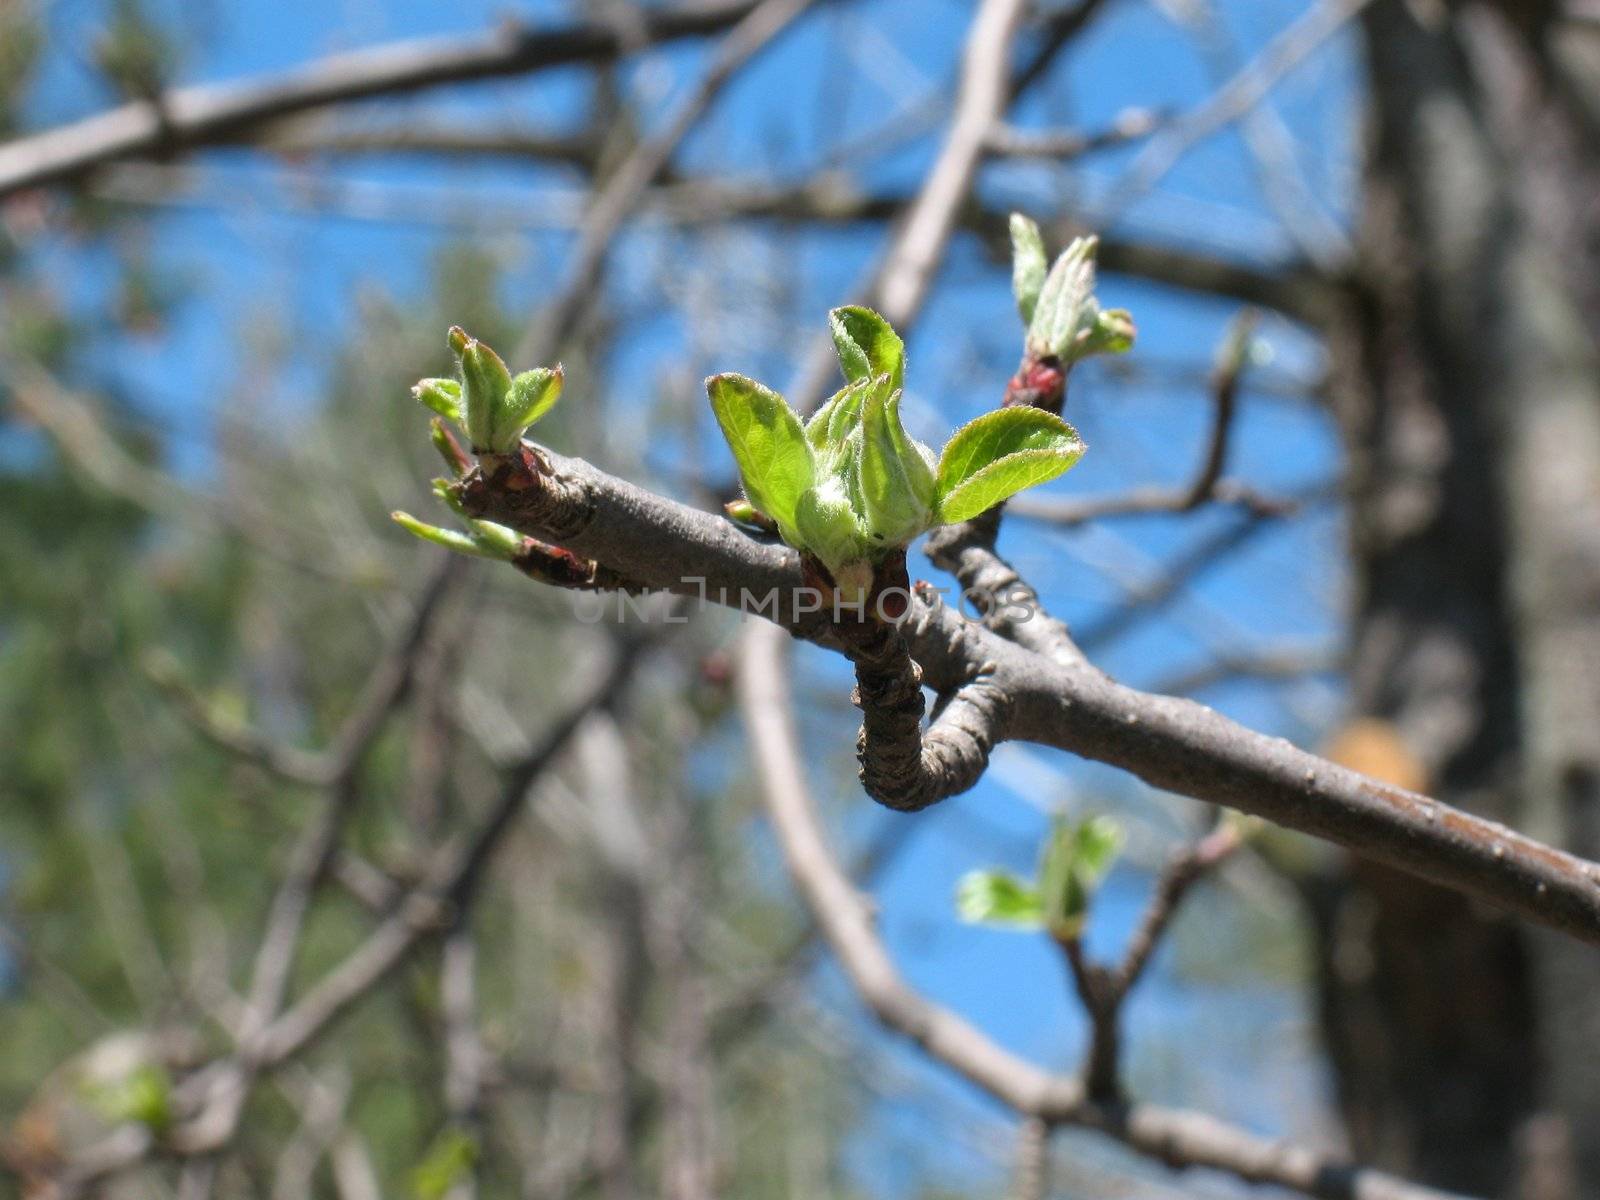 Image of a bud forming on a wild apple tree in the spring.